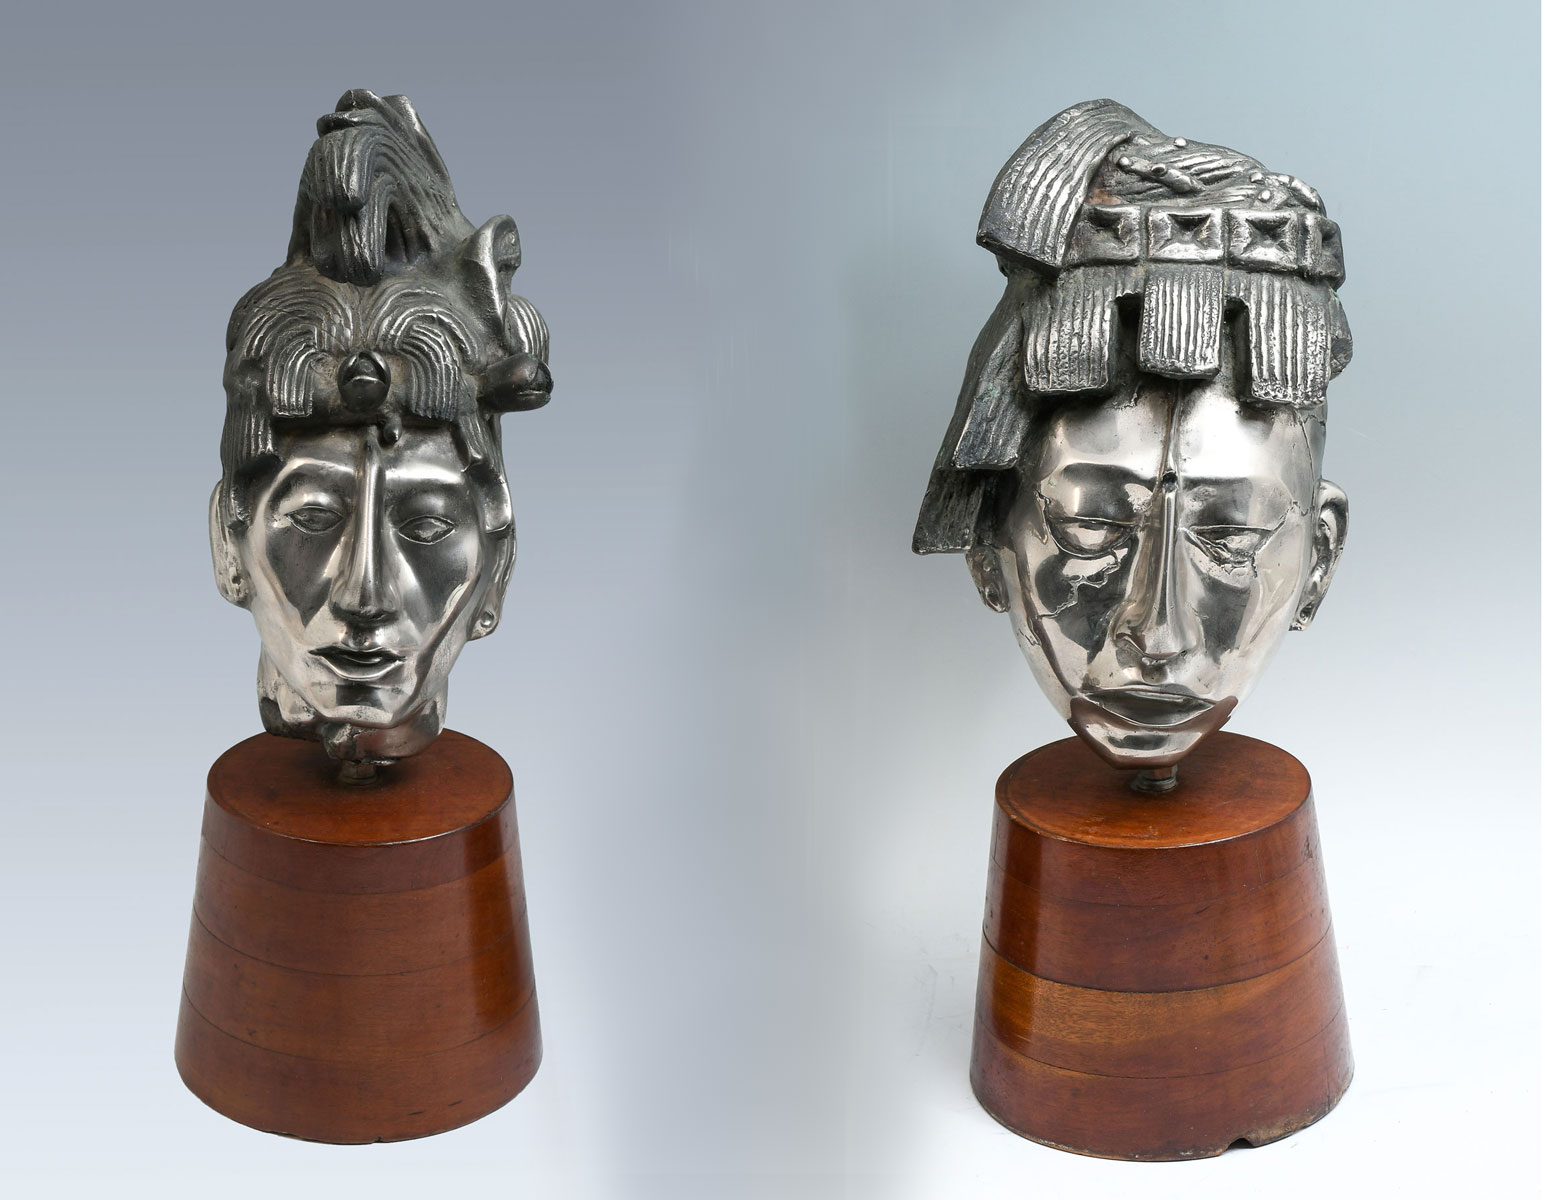 TWO SILVER CLAD TRIBAL BUSTS MAYAN/AZTEC?: